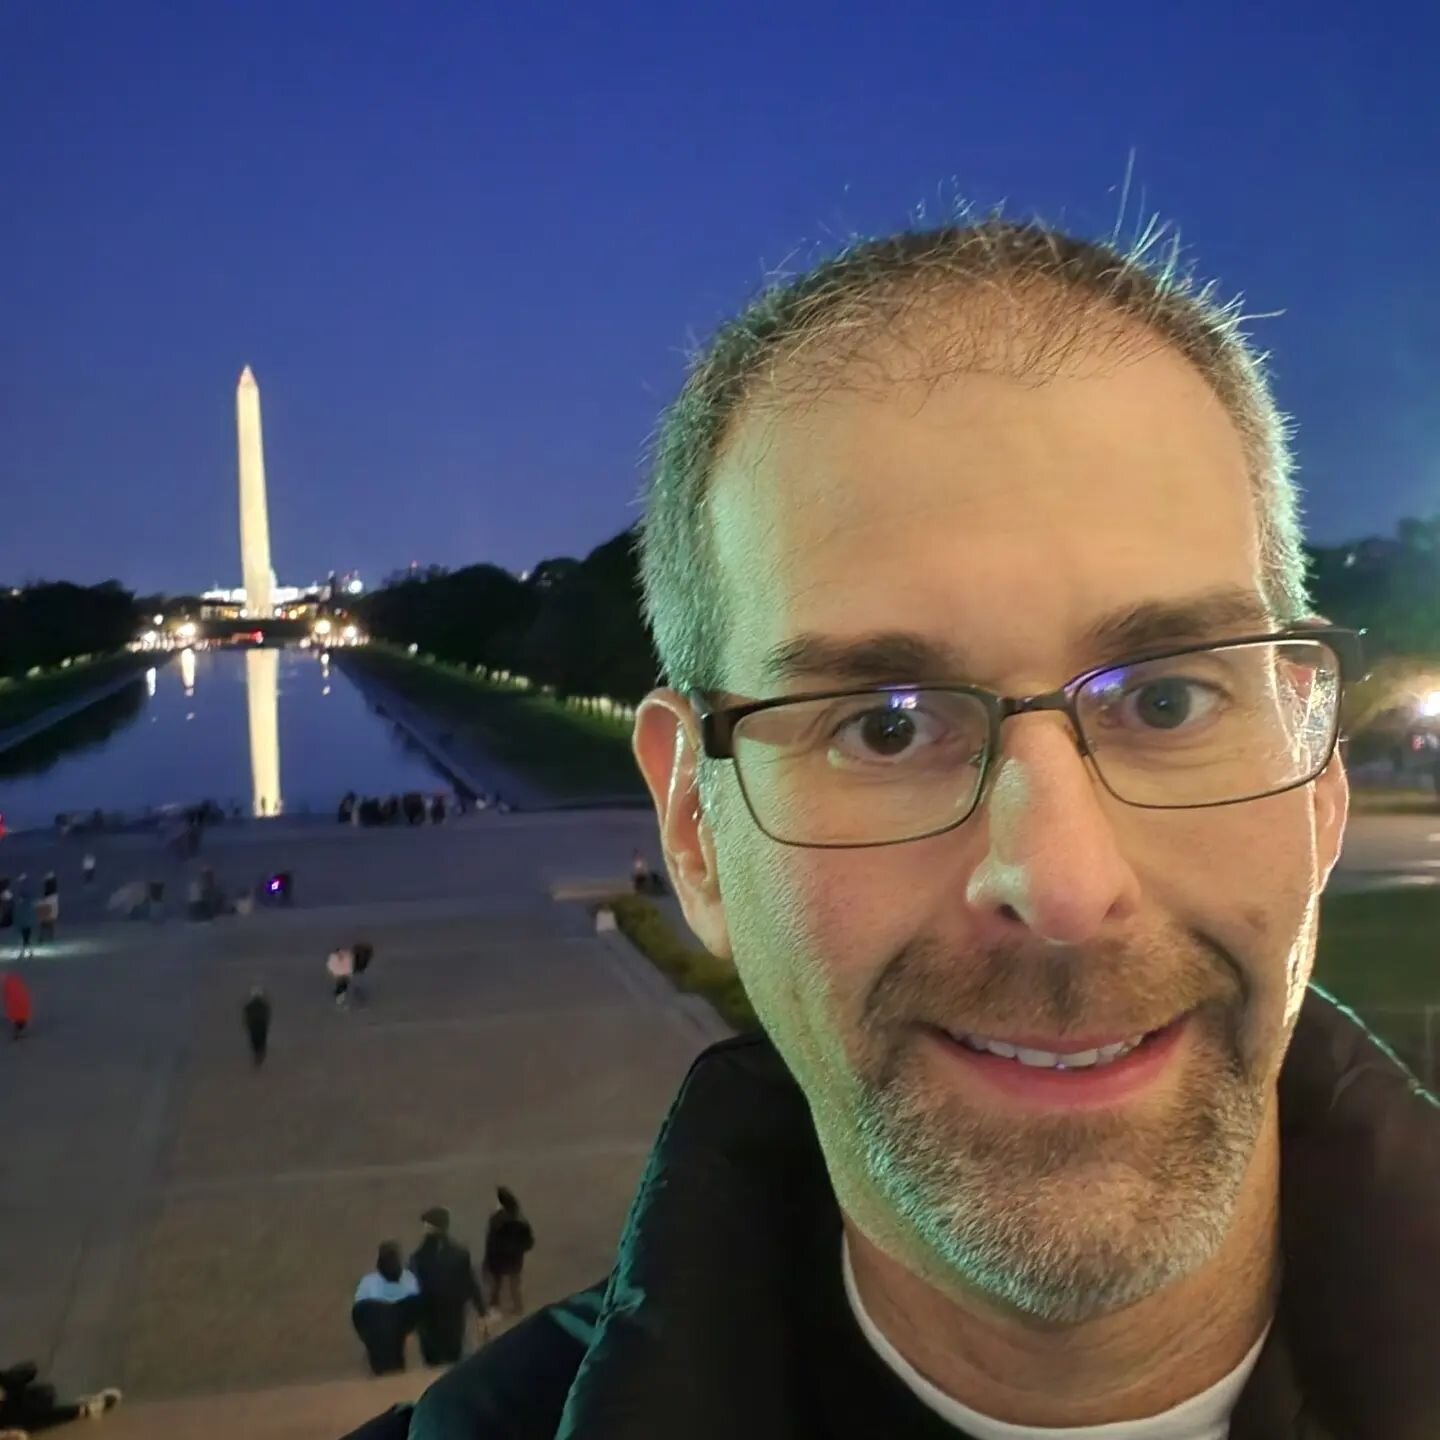 Steve is on a work trip to DC and got a chance to see some of the sights. DC is one of his favorite spots to visit and was the first trip we took together many years ago! It will be so much fun to share DC with a family of our own one day.

Find out 